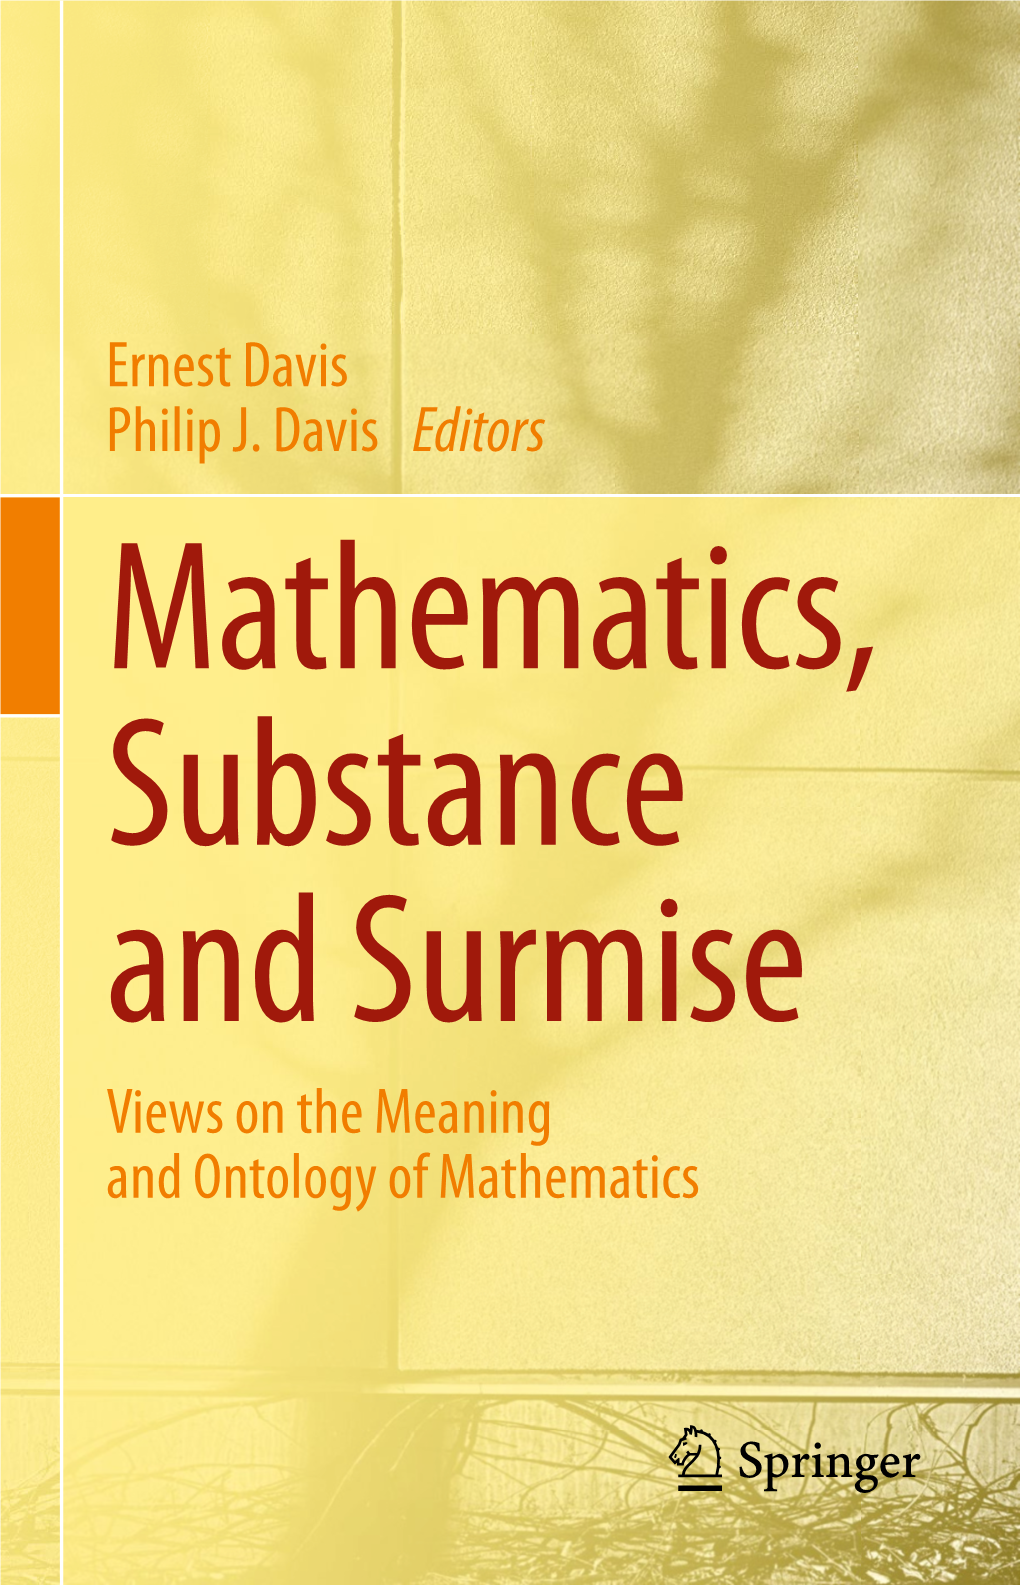 Ernest Davis Philip J. Davis Editors Views on the Meaning And